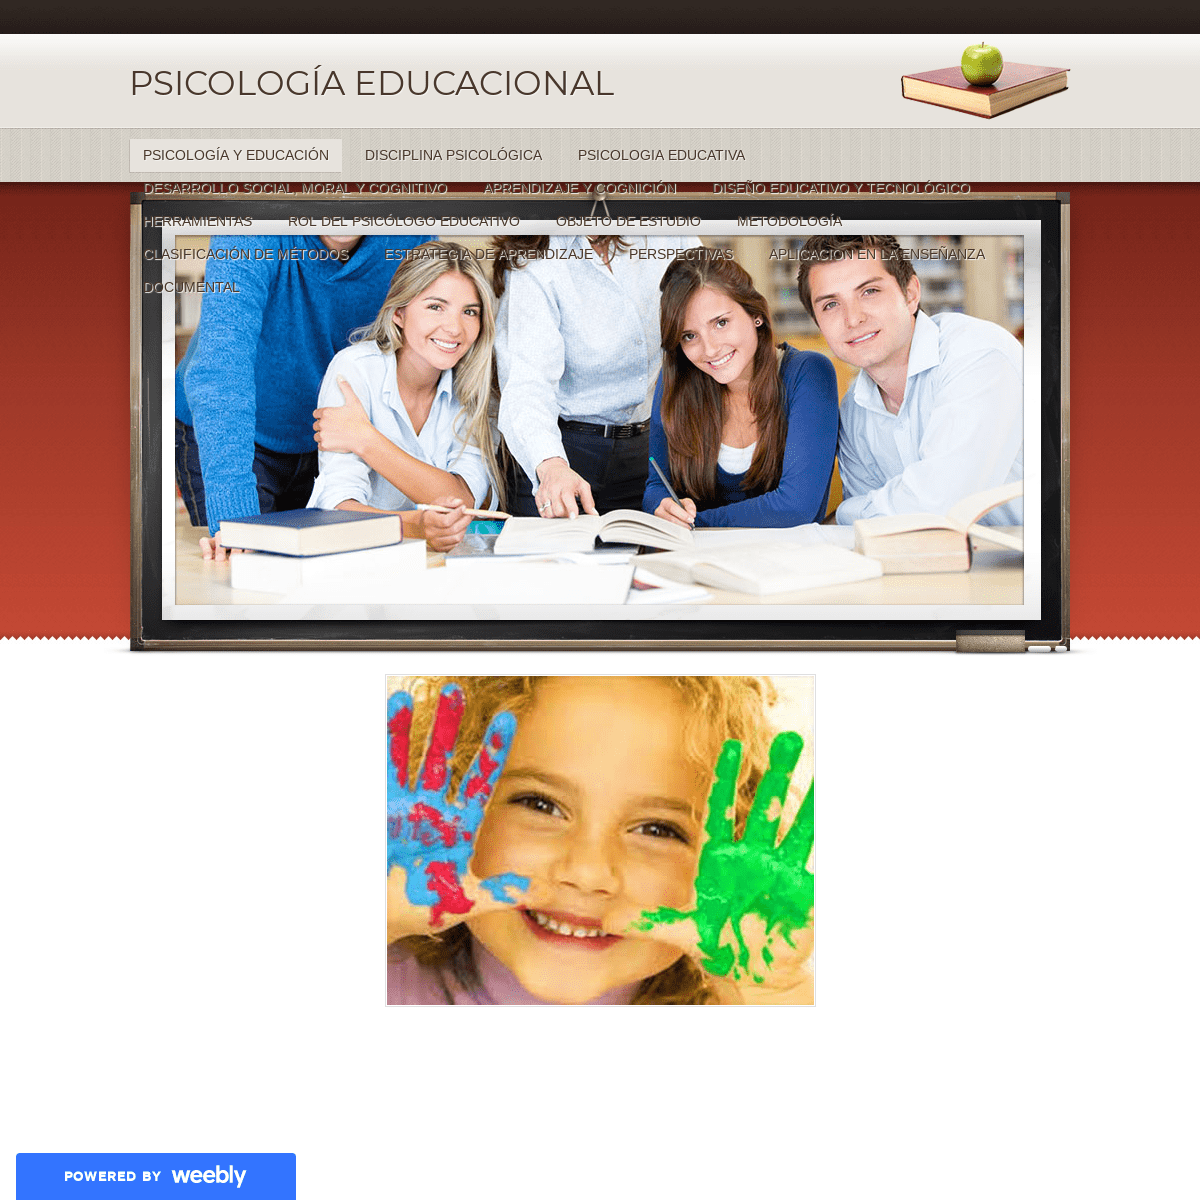 A complete backup of psicologiaeducacional.weebly.com